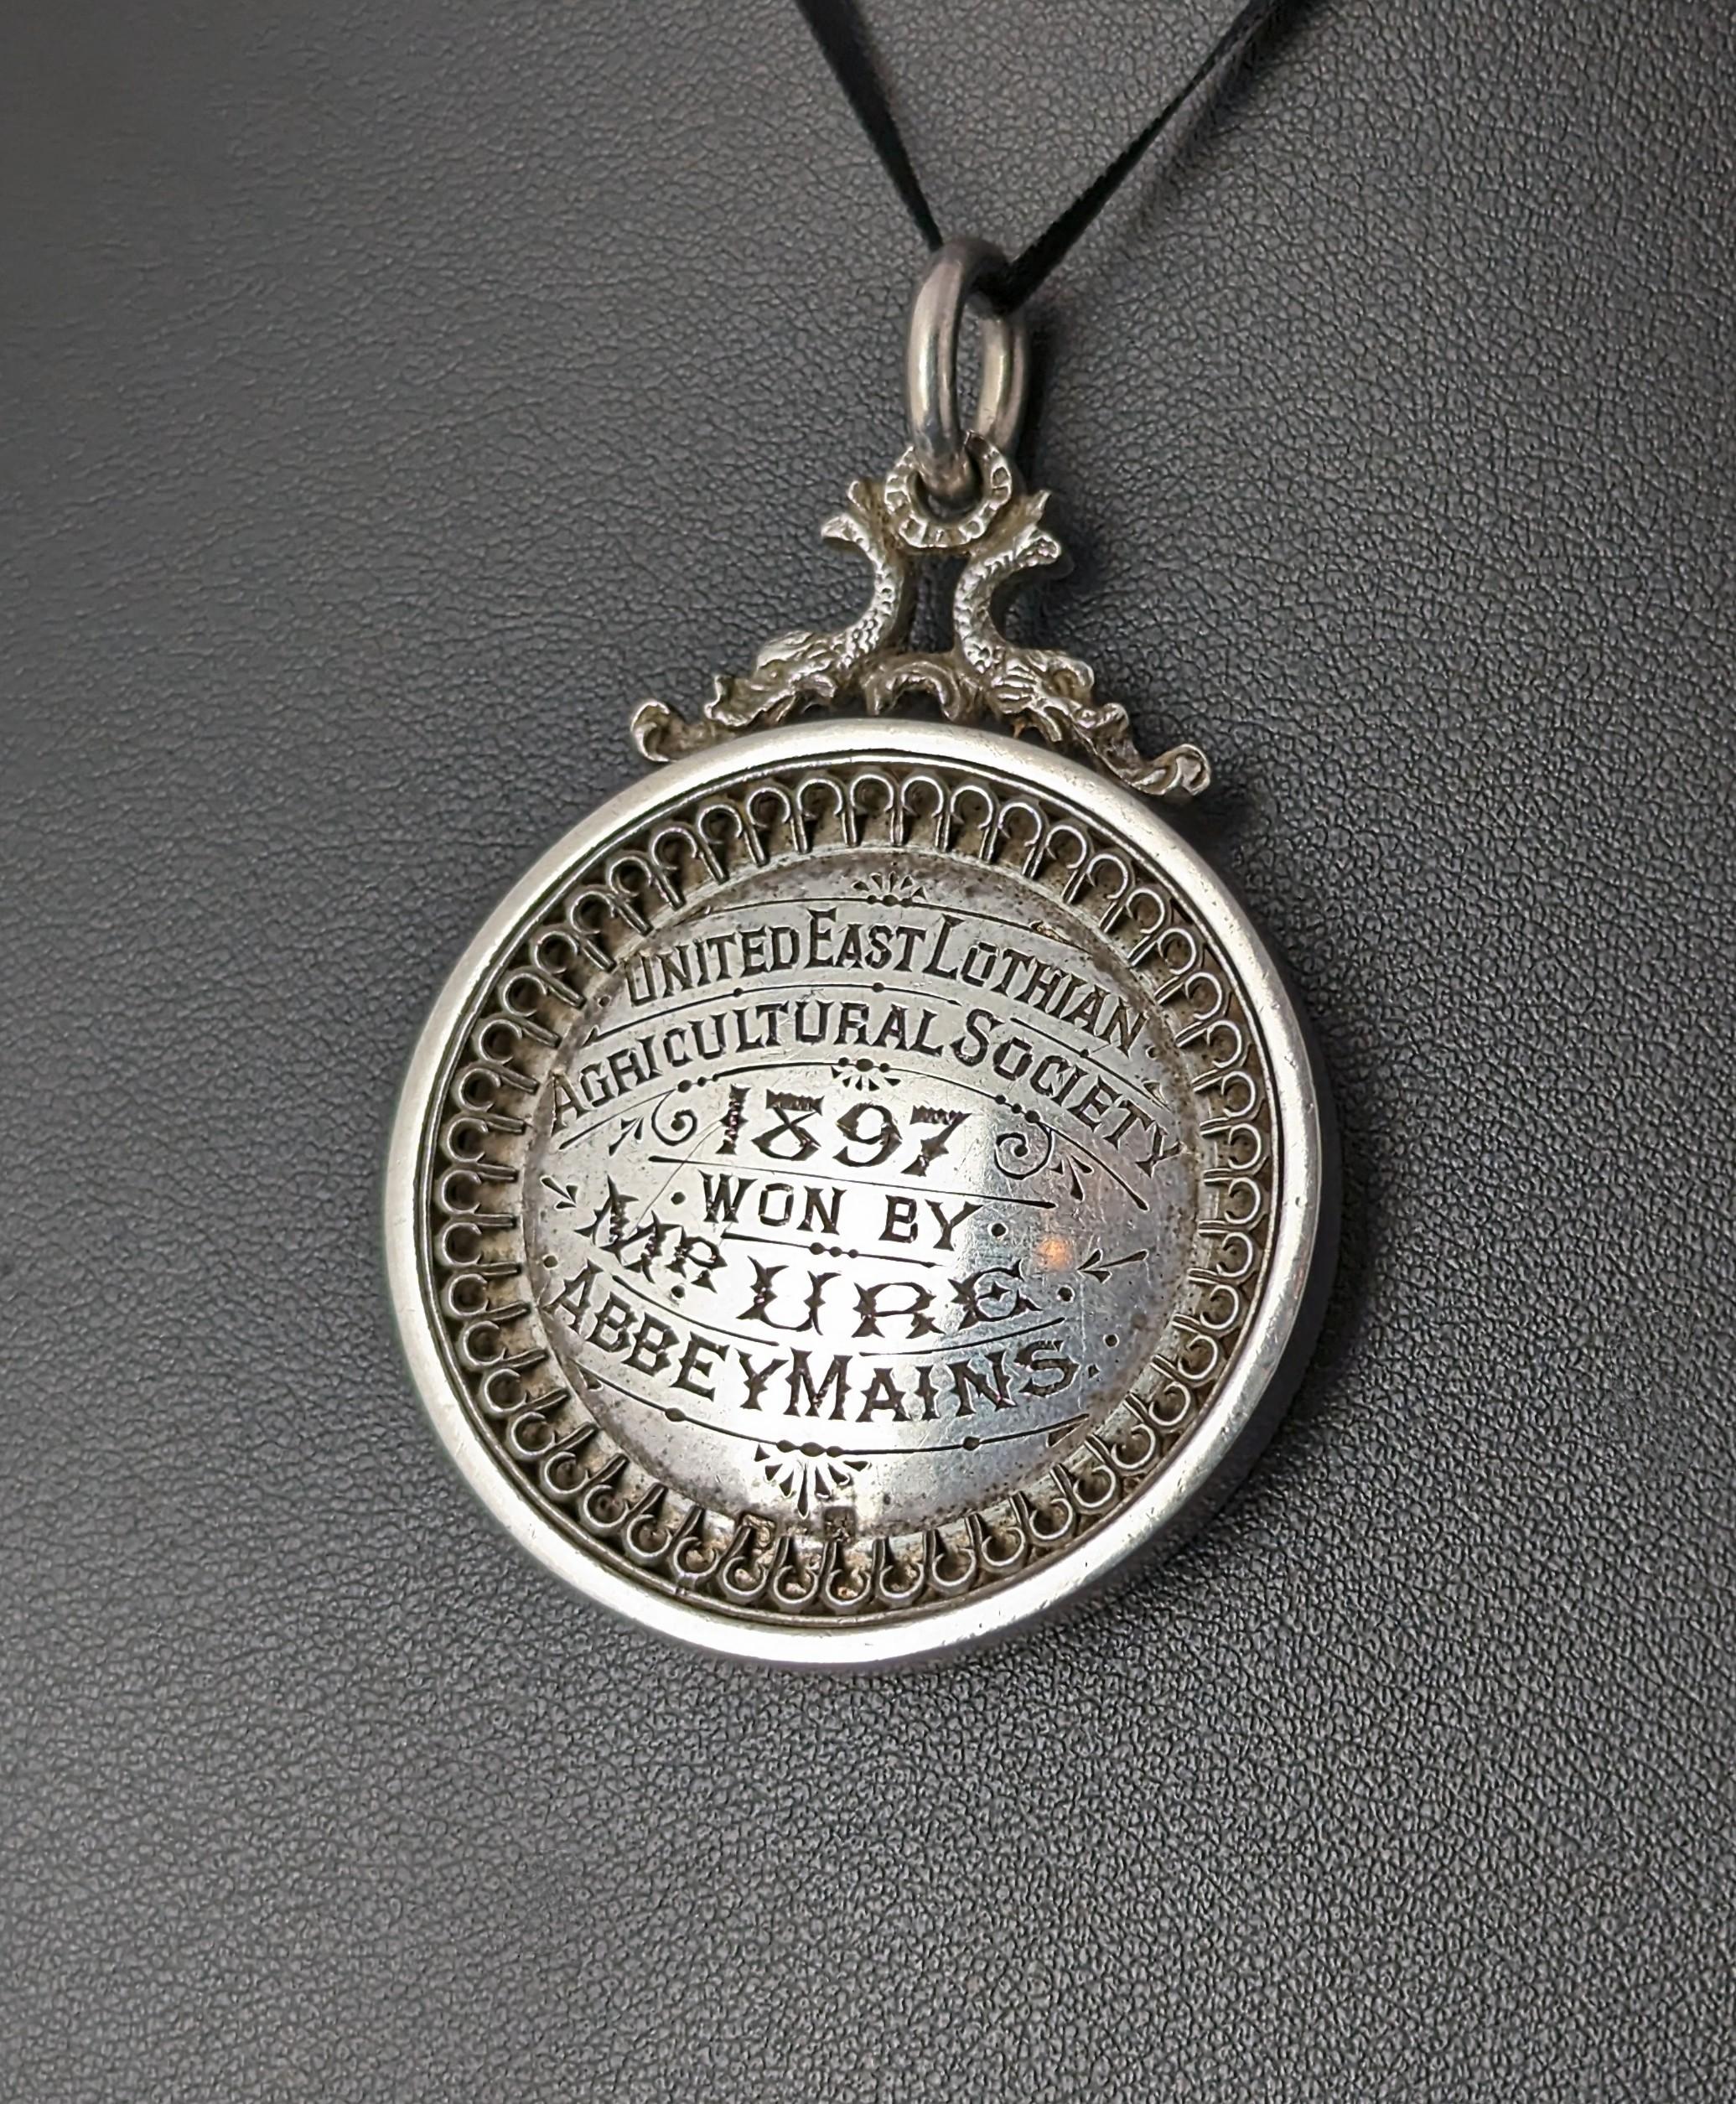 A wonderfully interesting piece here.

I truly love this piece it is so rich in history and Victorian design, there are two medals made from sterling silver, each with a beautifully engraved script to them.

One side reads United East Lothian